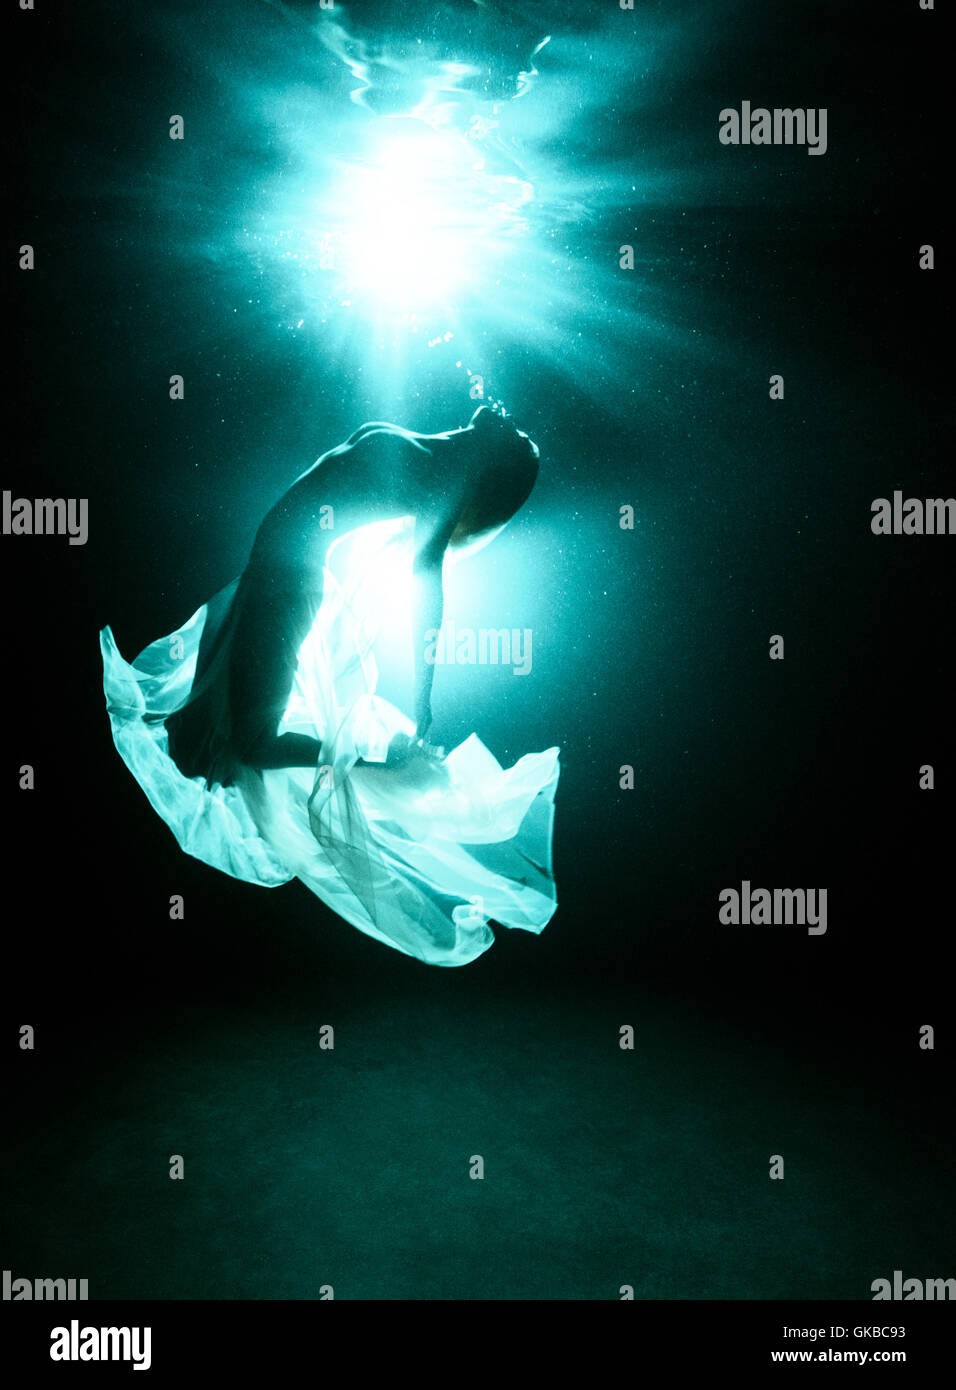 Silouette of a woman in a pool at night, Virginia Beach, Virginia Stock Photo